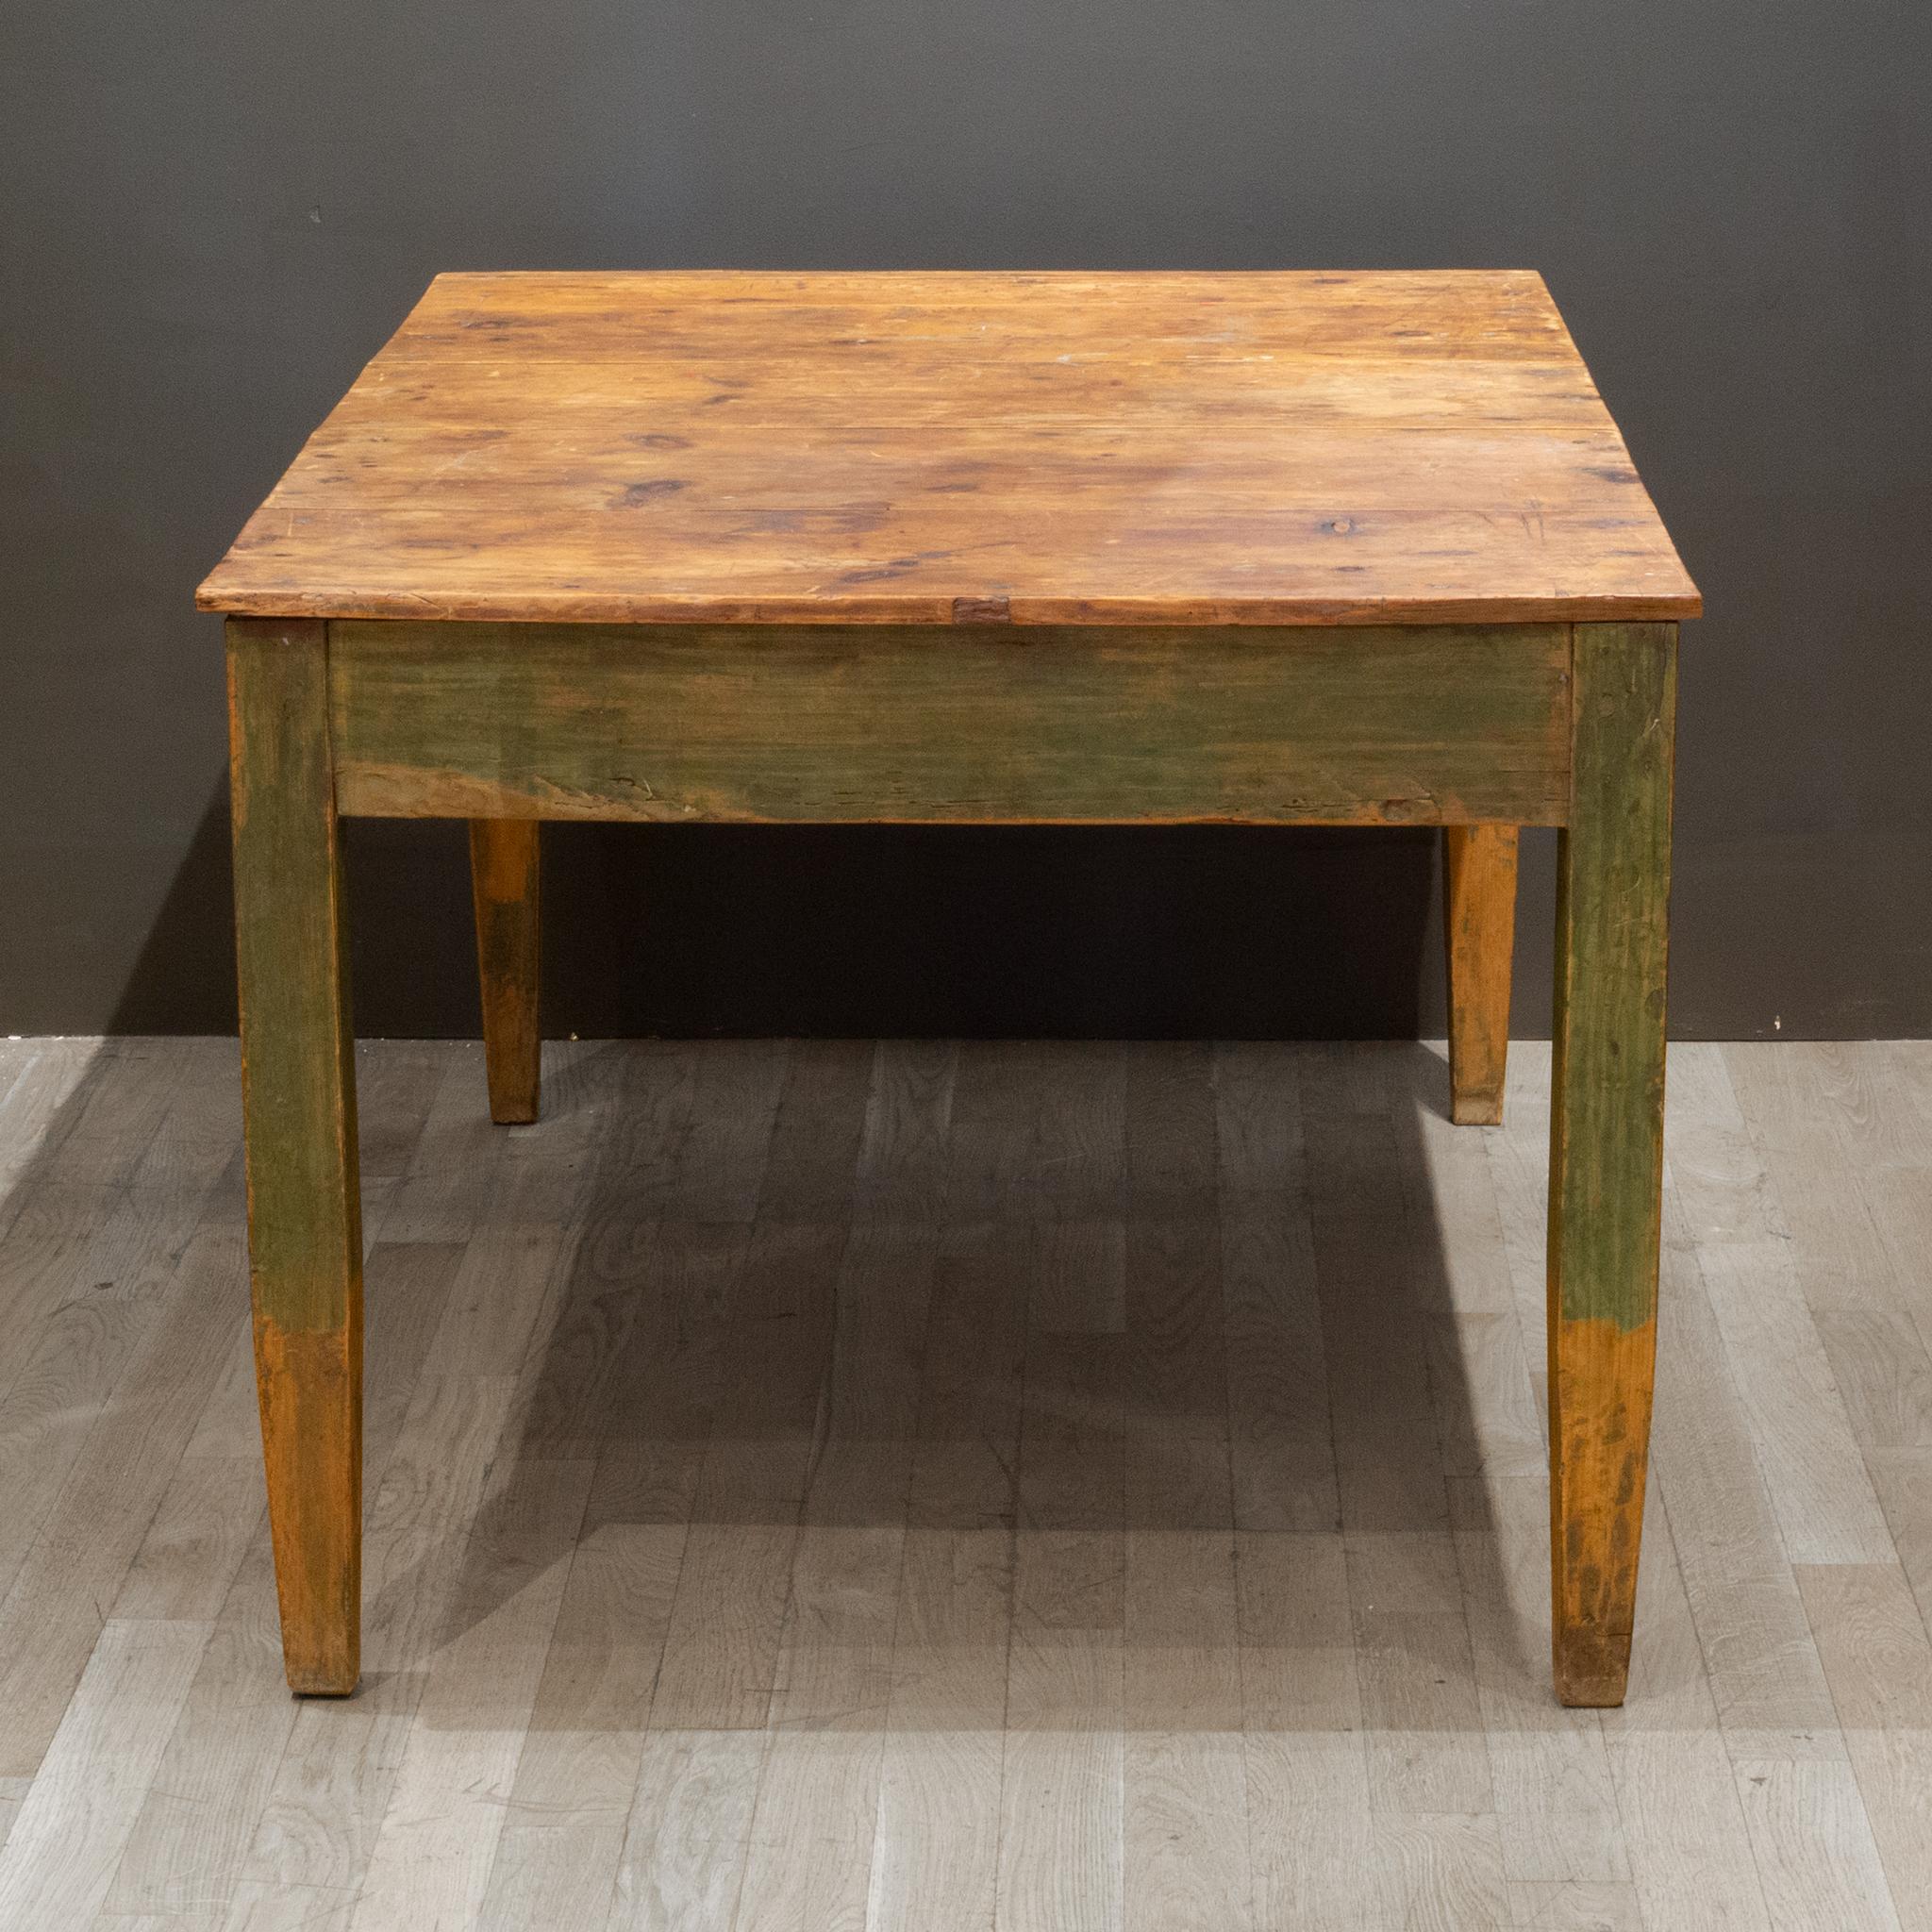 American Mid 19th/Early 20th C. Primitive Farmhouse Table, c.1850-1920